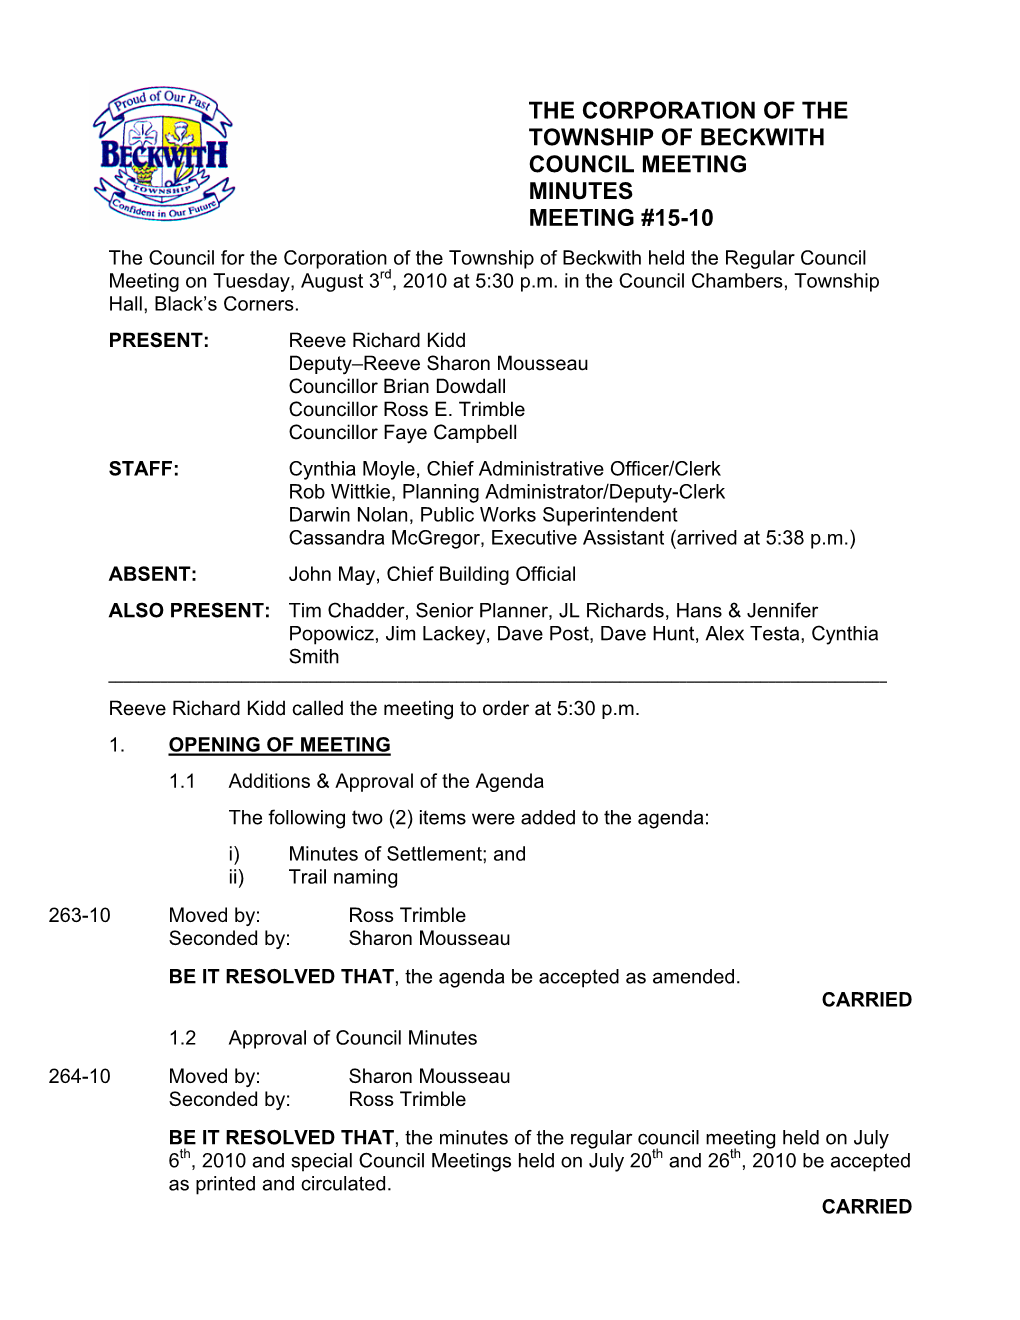 The Corporation of the Township of Beckwith Council Meeting Minutes Meeting #15-10